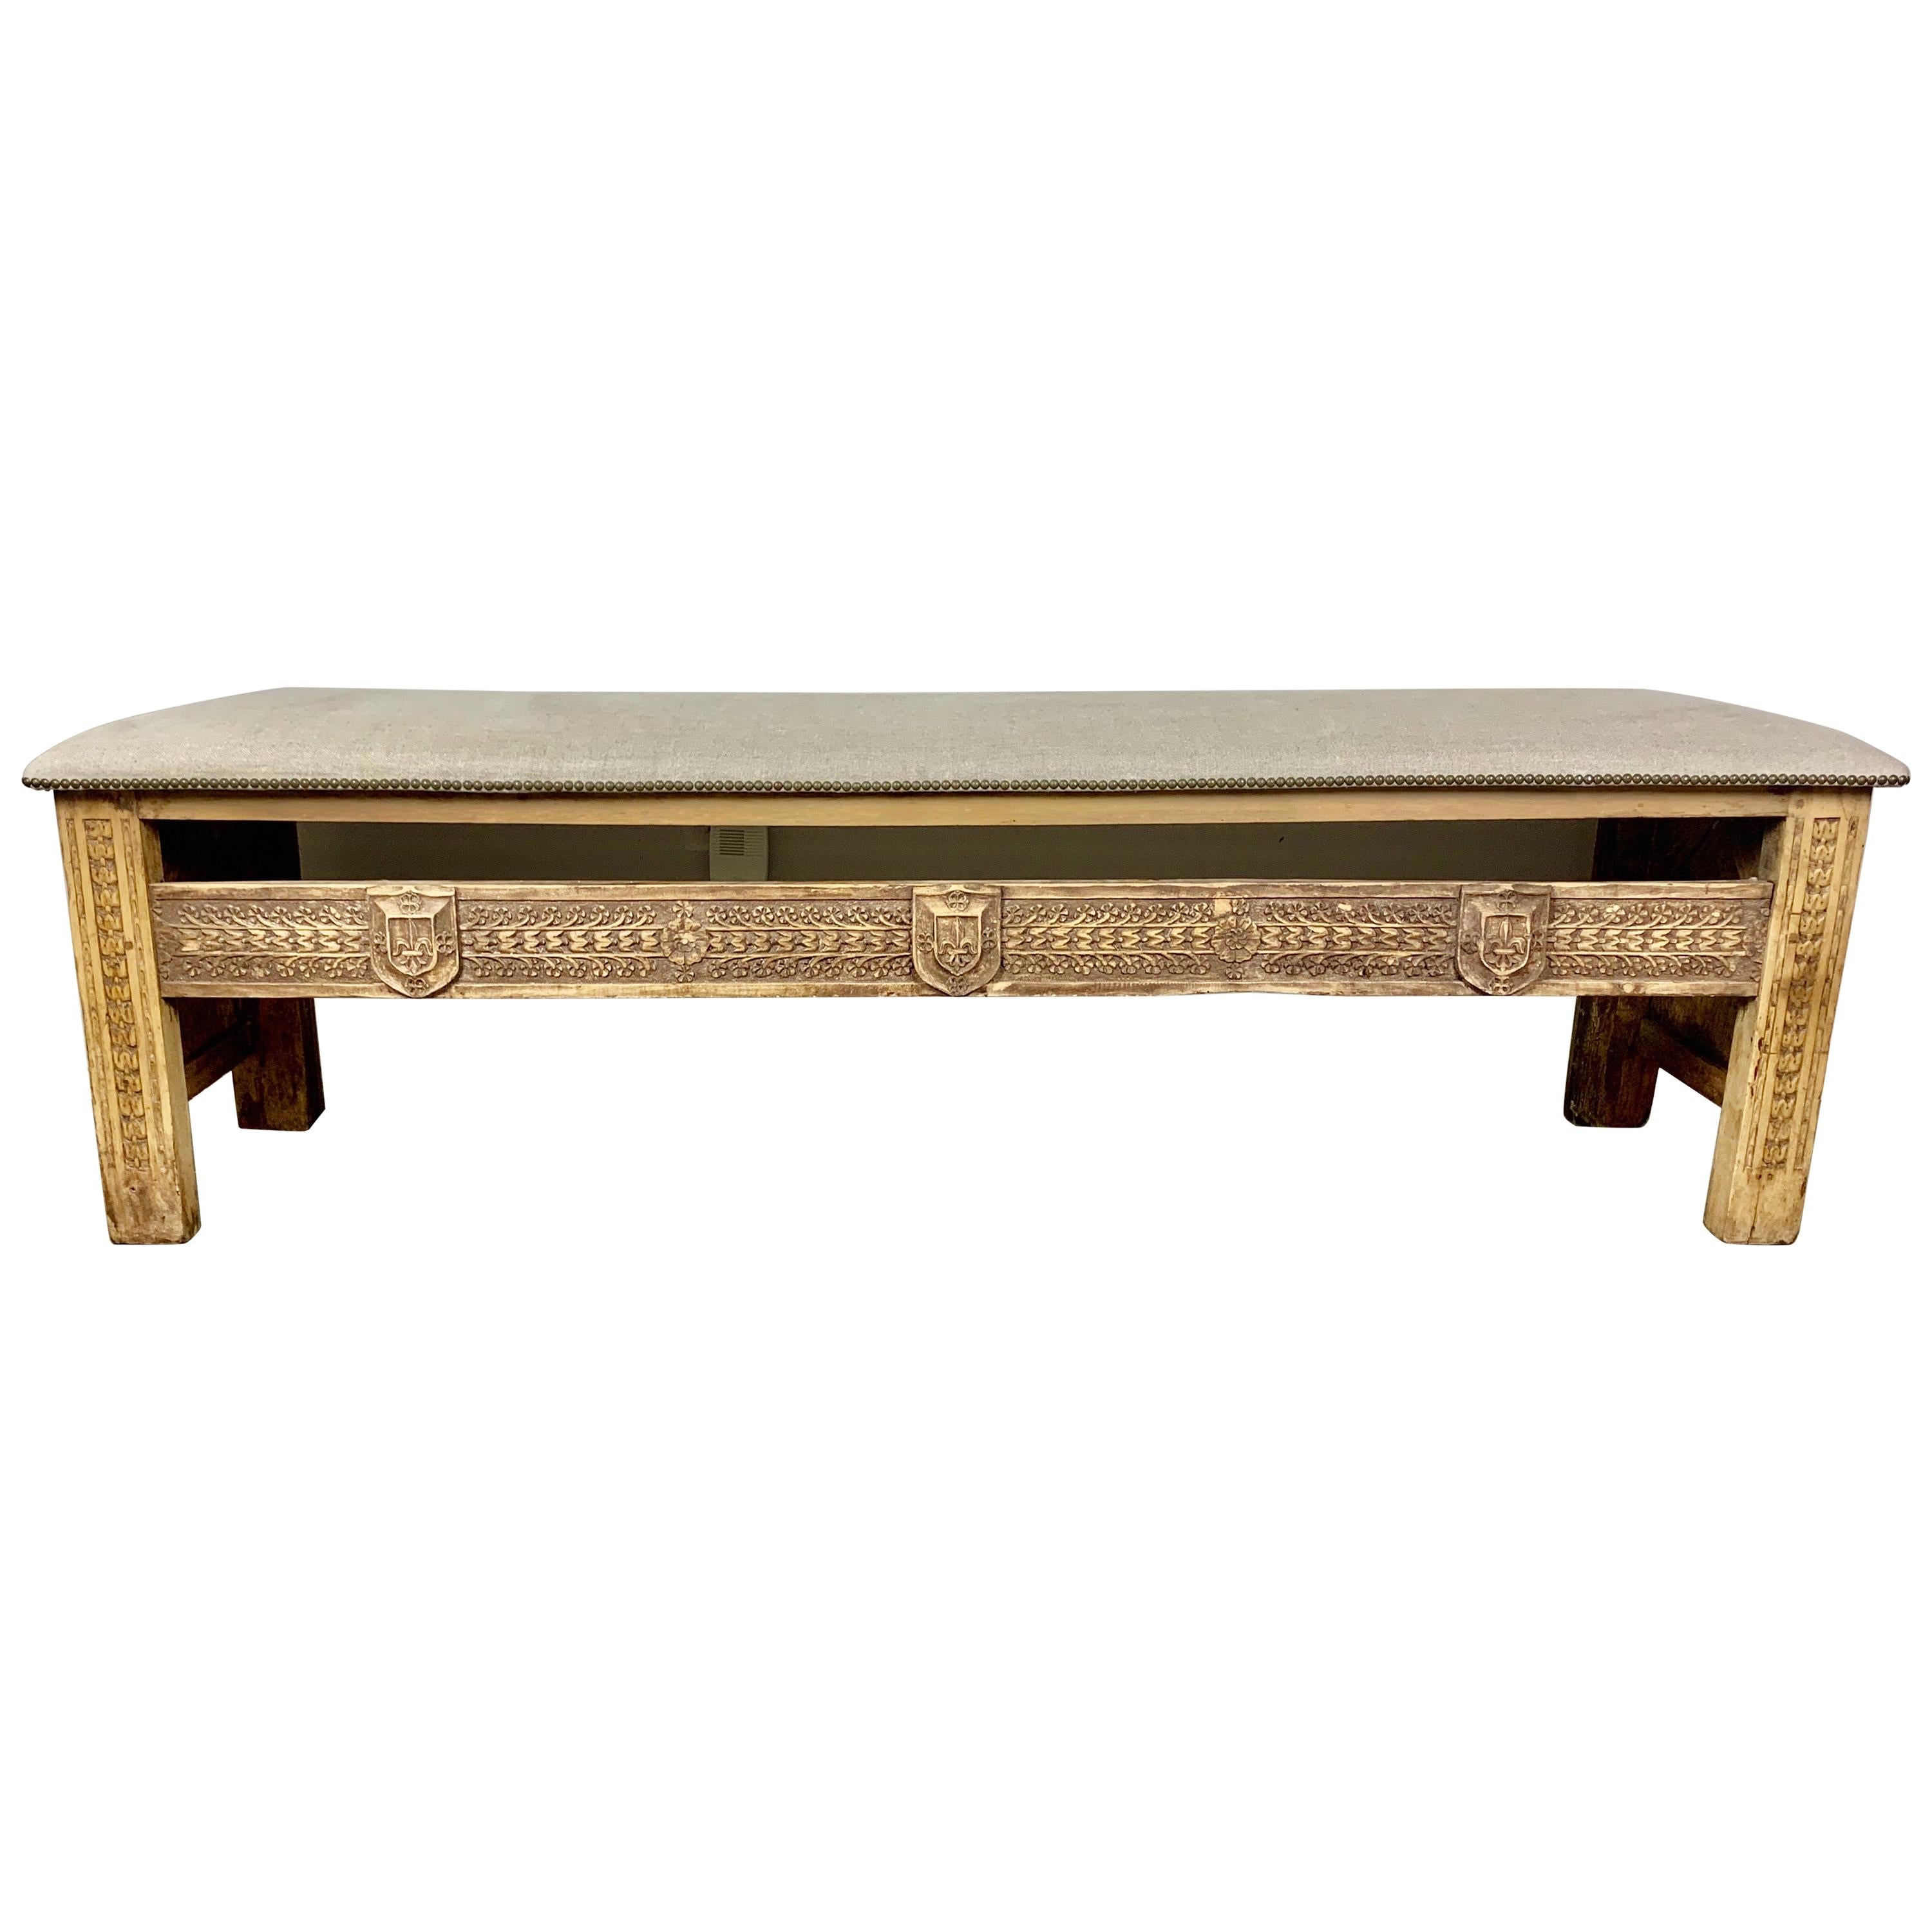 Monumental Spanish Carved Wood Bench with Linen Upholstery